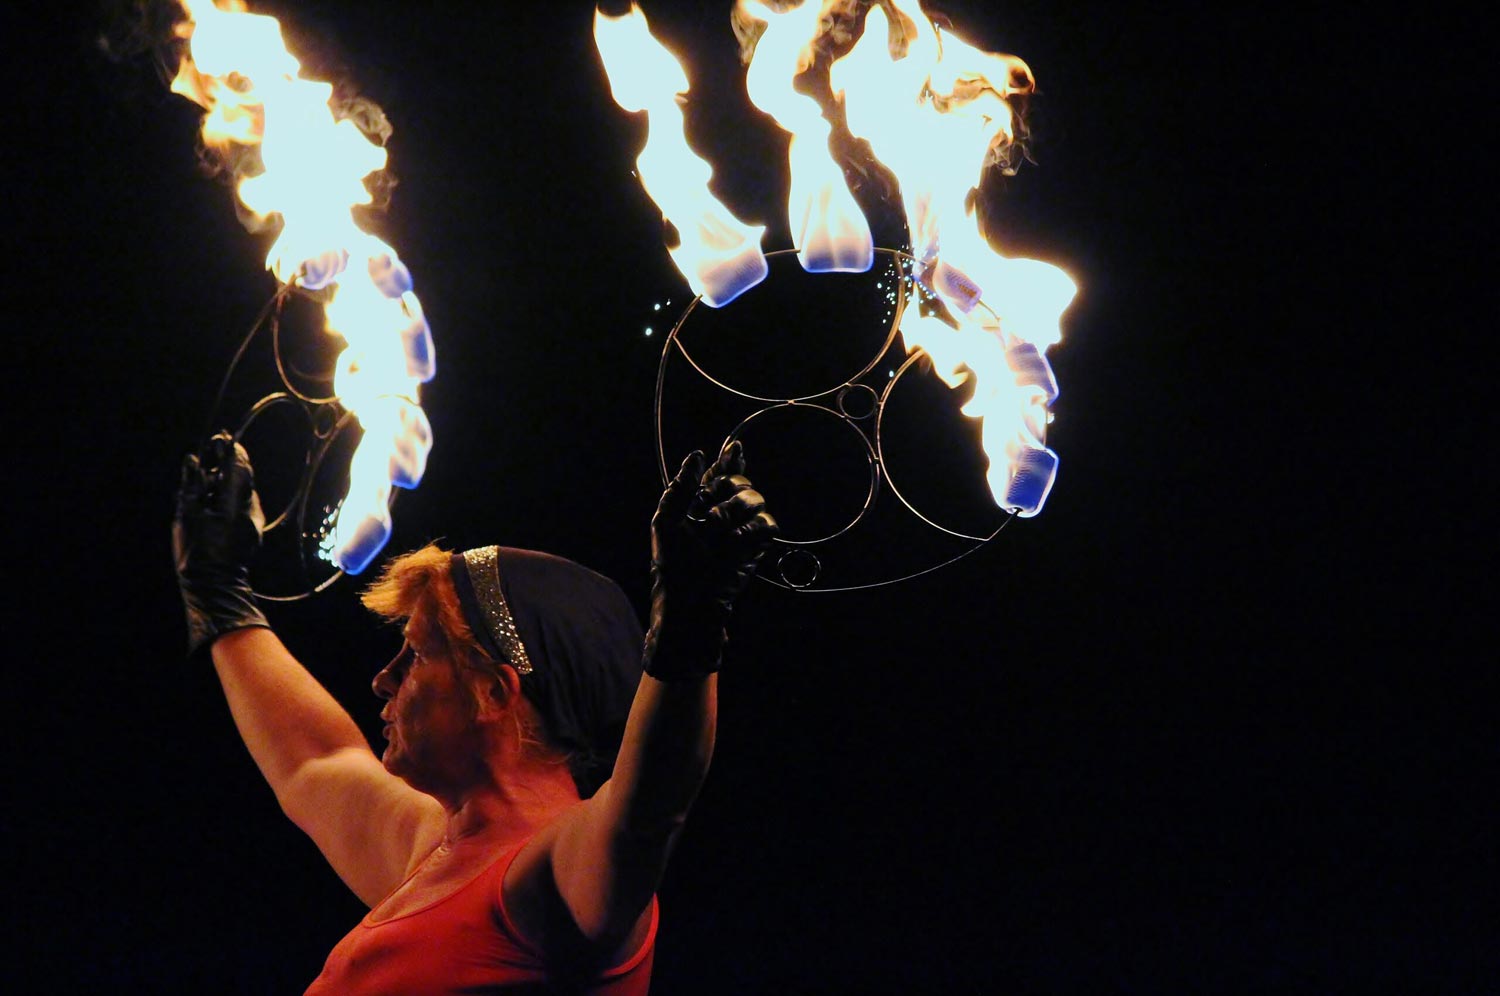 2021_12_hand-light-woman-glove-dance-artist-fire-glow-darkness-burn-performance-art-art-stage-performance-hot-event-demonstration-performing-arts-fire-show-700327-scaled